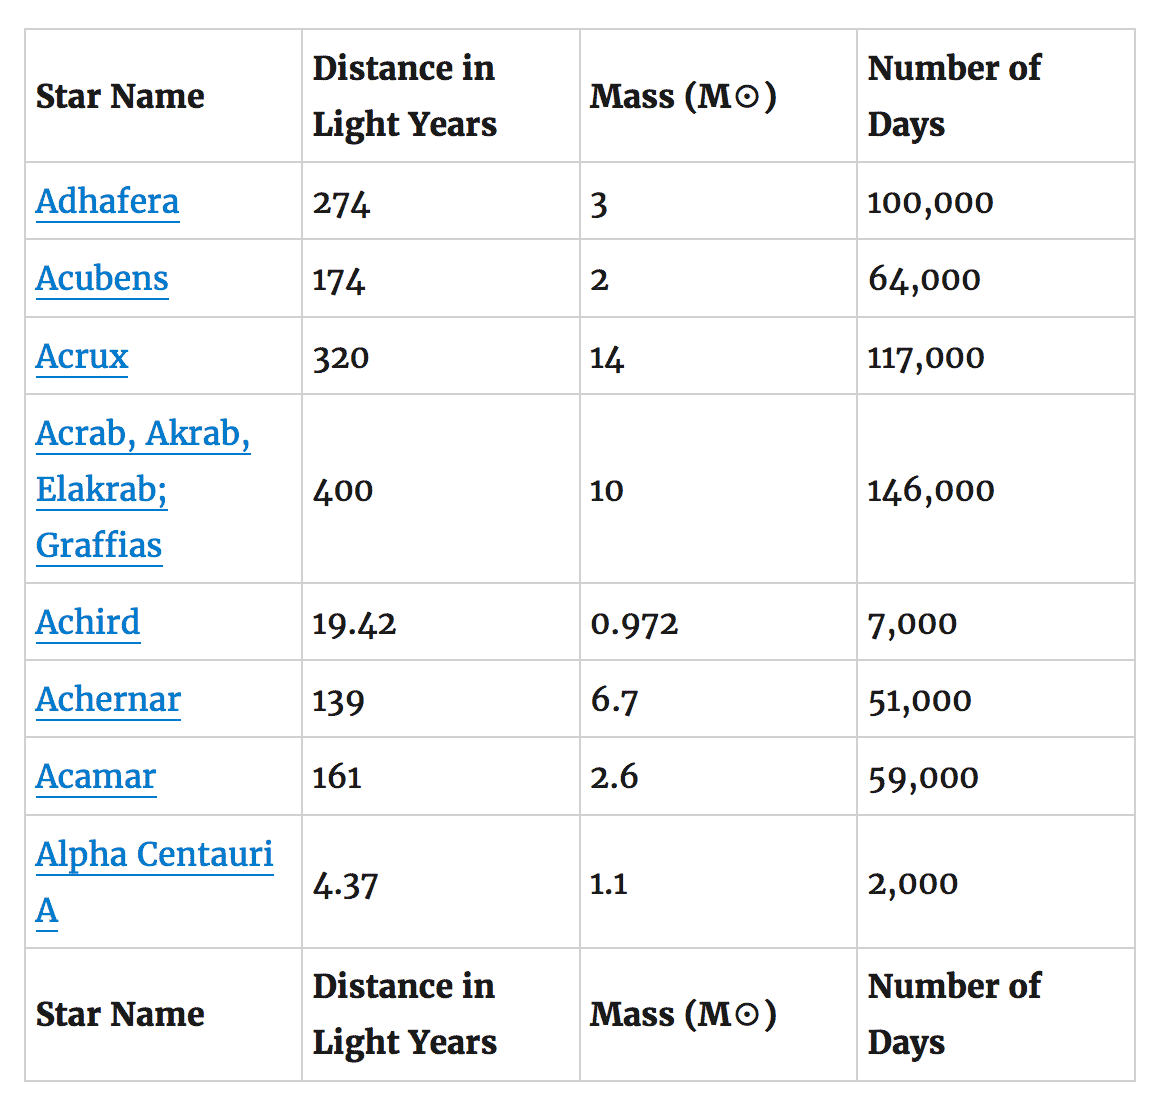 A GravityView Table layout showing data about different stars with the Number of Days column rounded to the nearest thousand